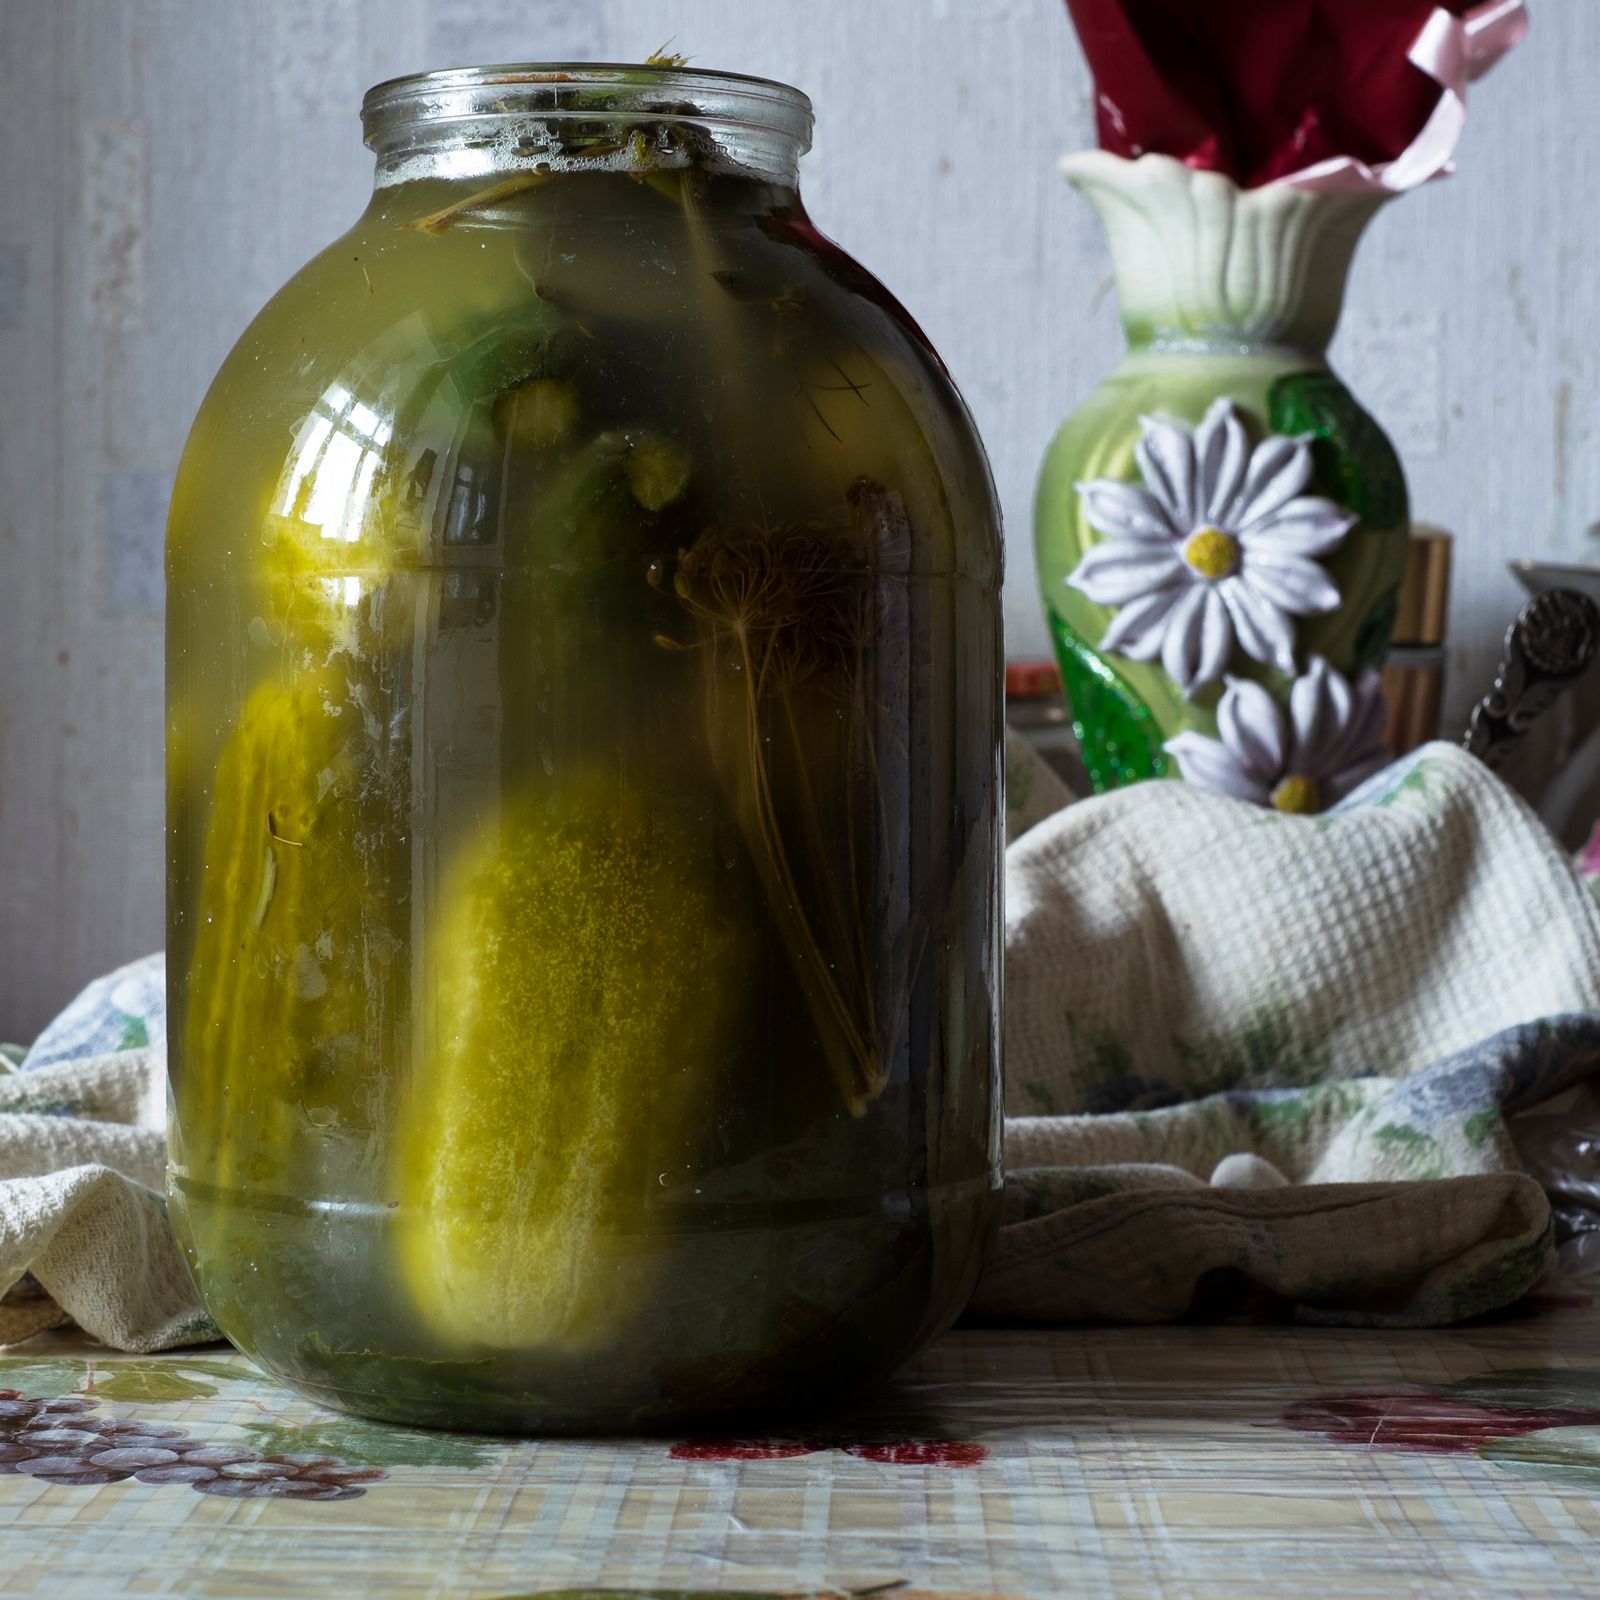 © Maria Quigley - A newly prepared jar of pickled cucumbers stands on the kitchen table.